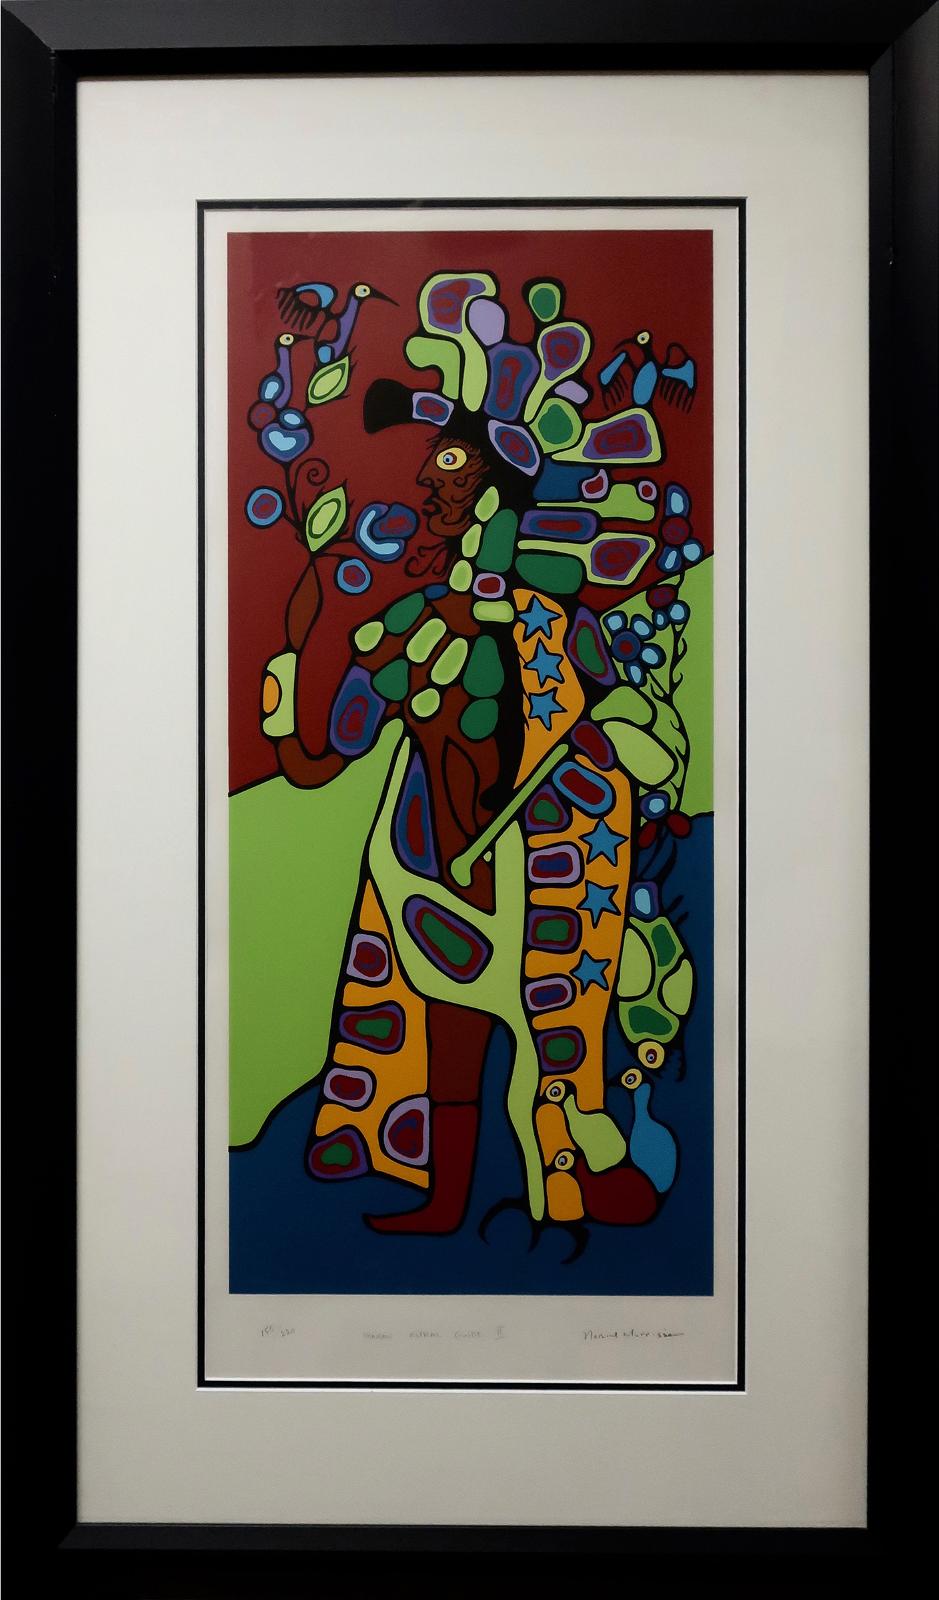 Norval H. Morrisseau (1931-2007) - Shaman Astral Guide Ii